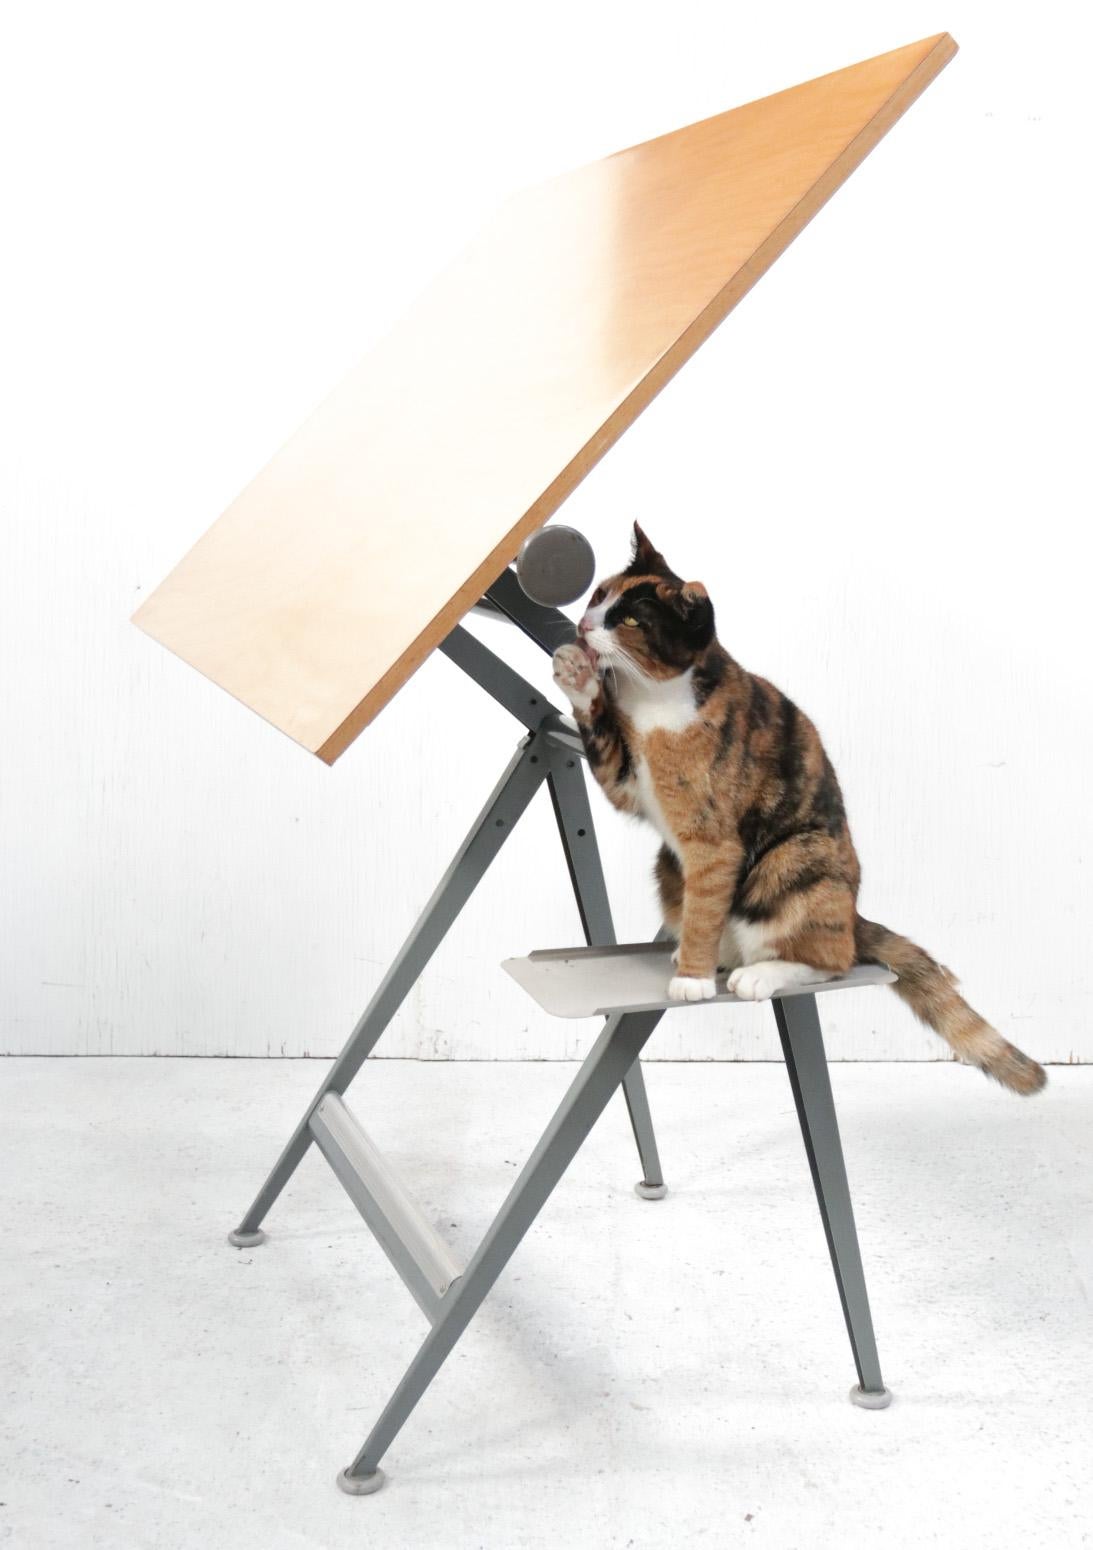 Reply Dutch Design Architect drafting table designed by Wim Rietveld and Friso Kramer for Ahrend de Circel in 1959.
Design classic, awarded with the 